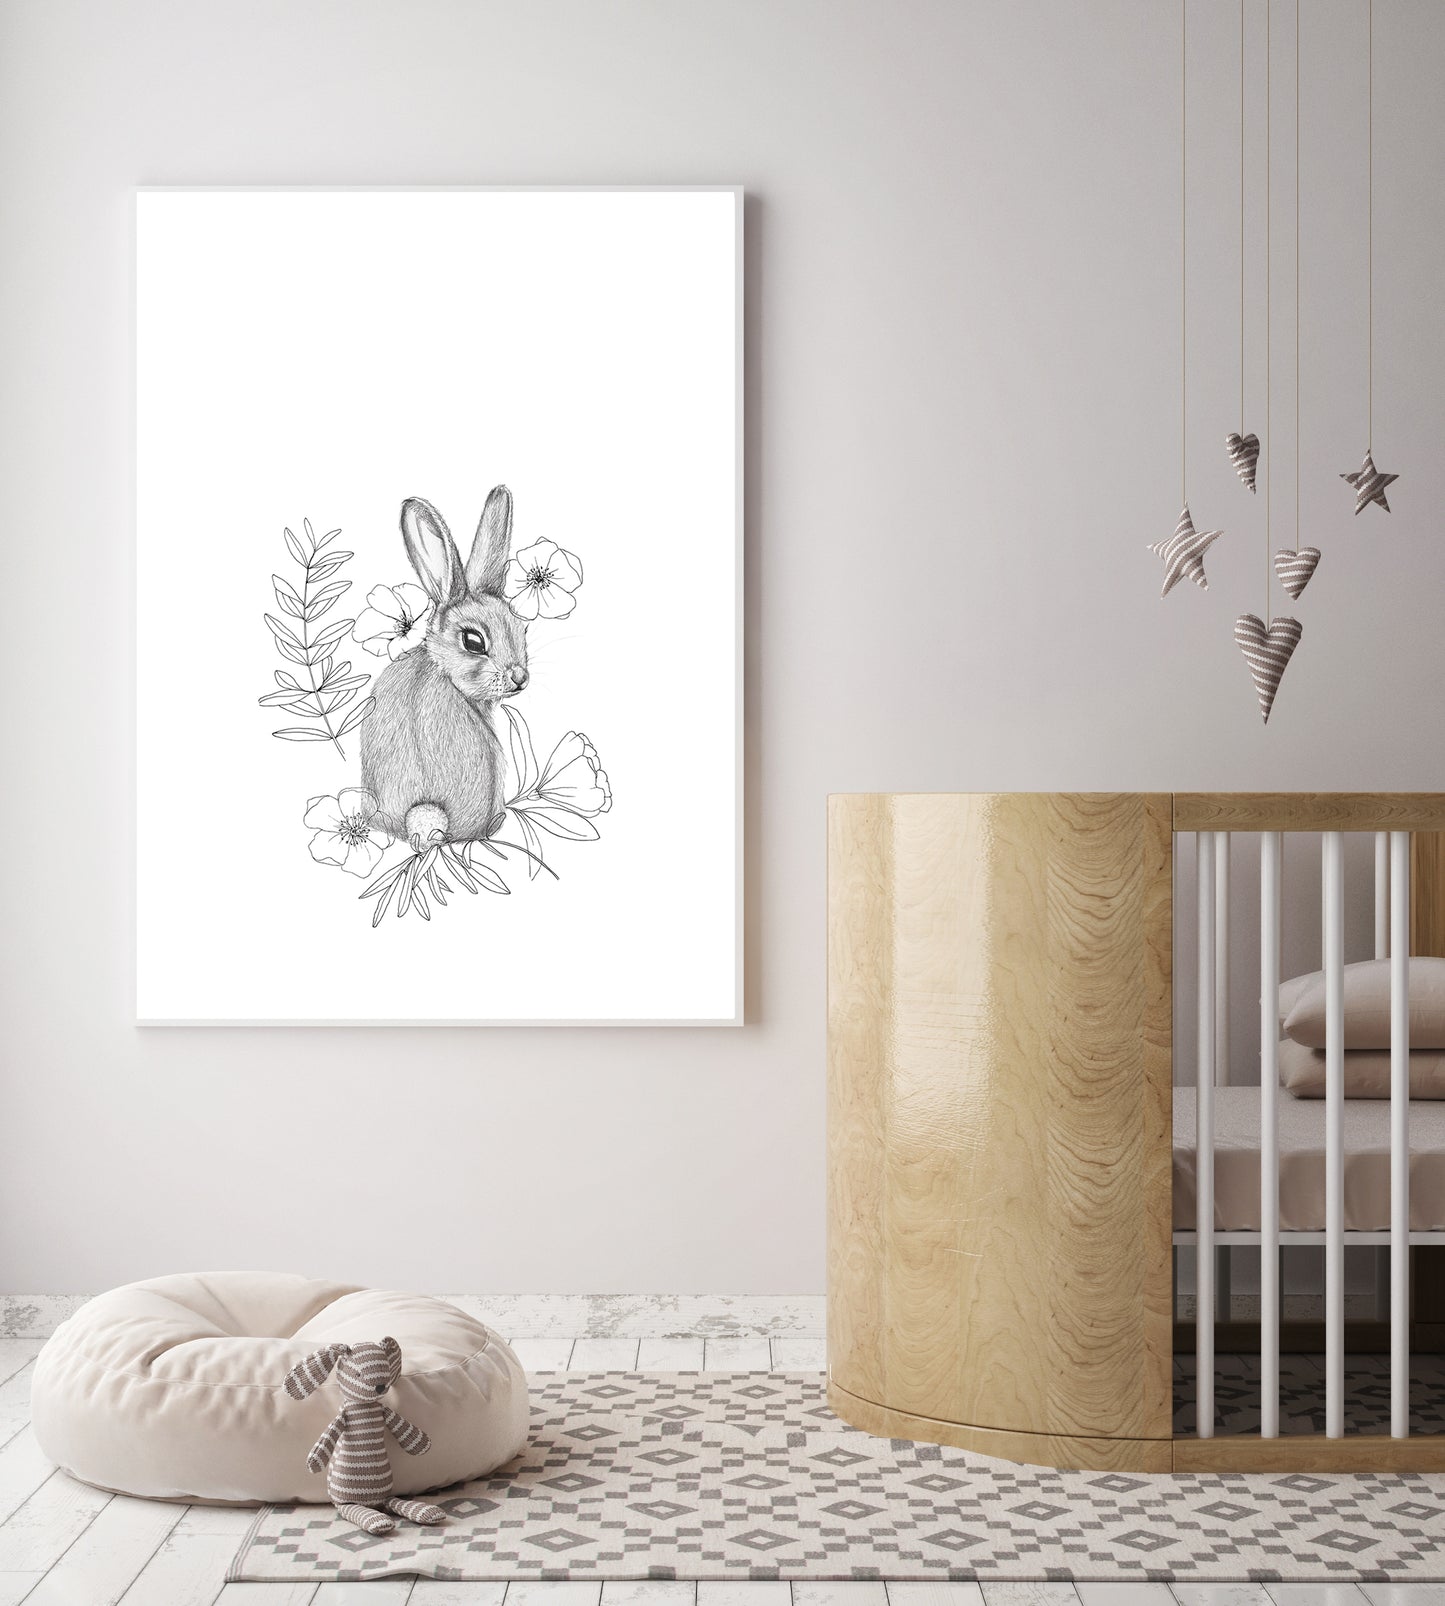 Bunny in sitting position turning around to look at you, drawn in pencil this black and white artwork suits a kids bedroom